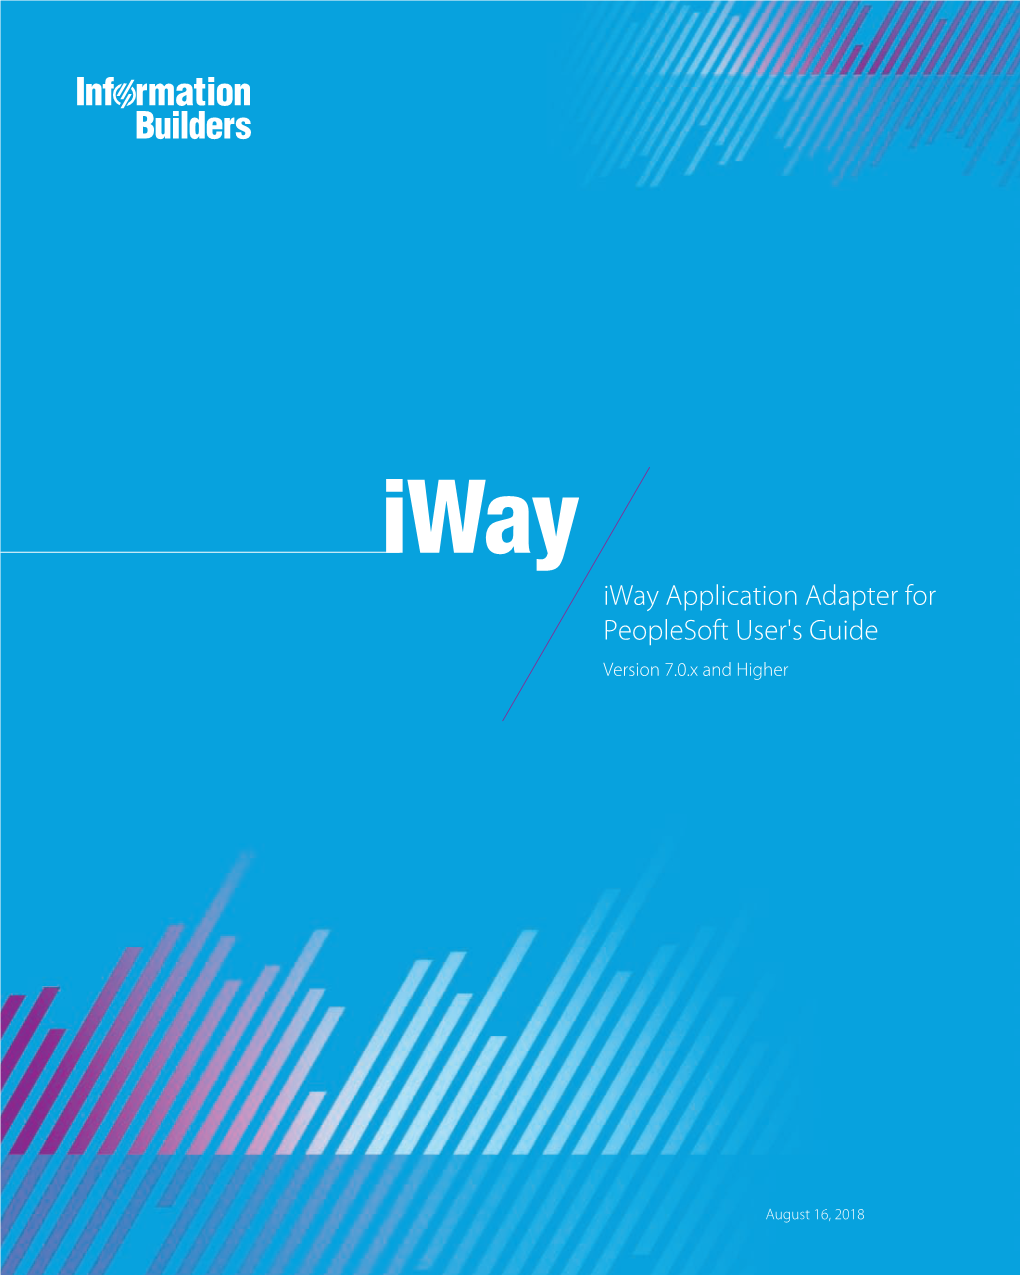 Iway Application Adapter for Peoplesoft User's Guide Version 7.0.X and Higher